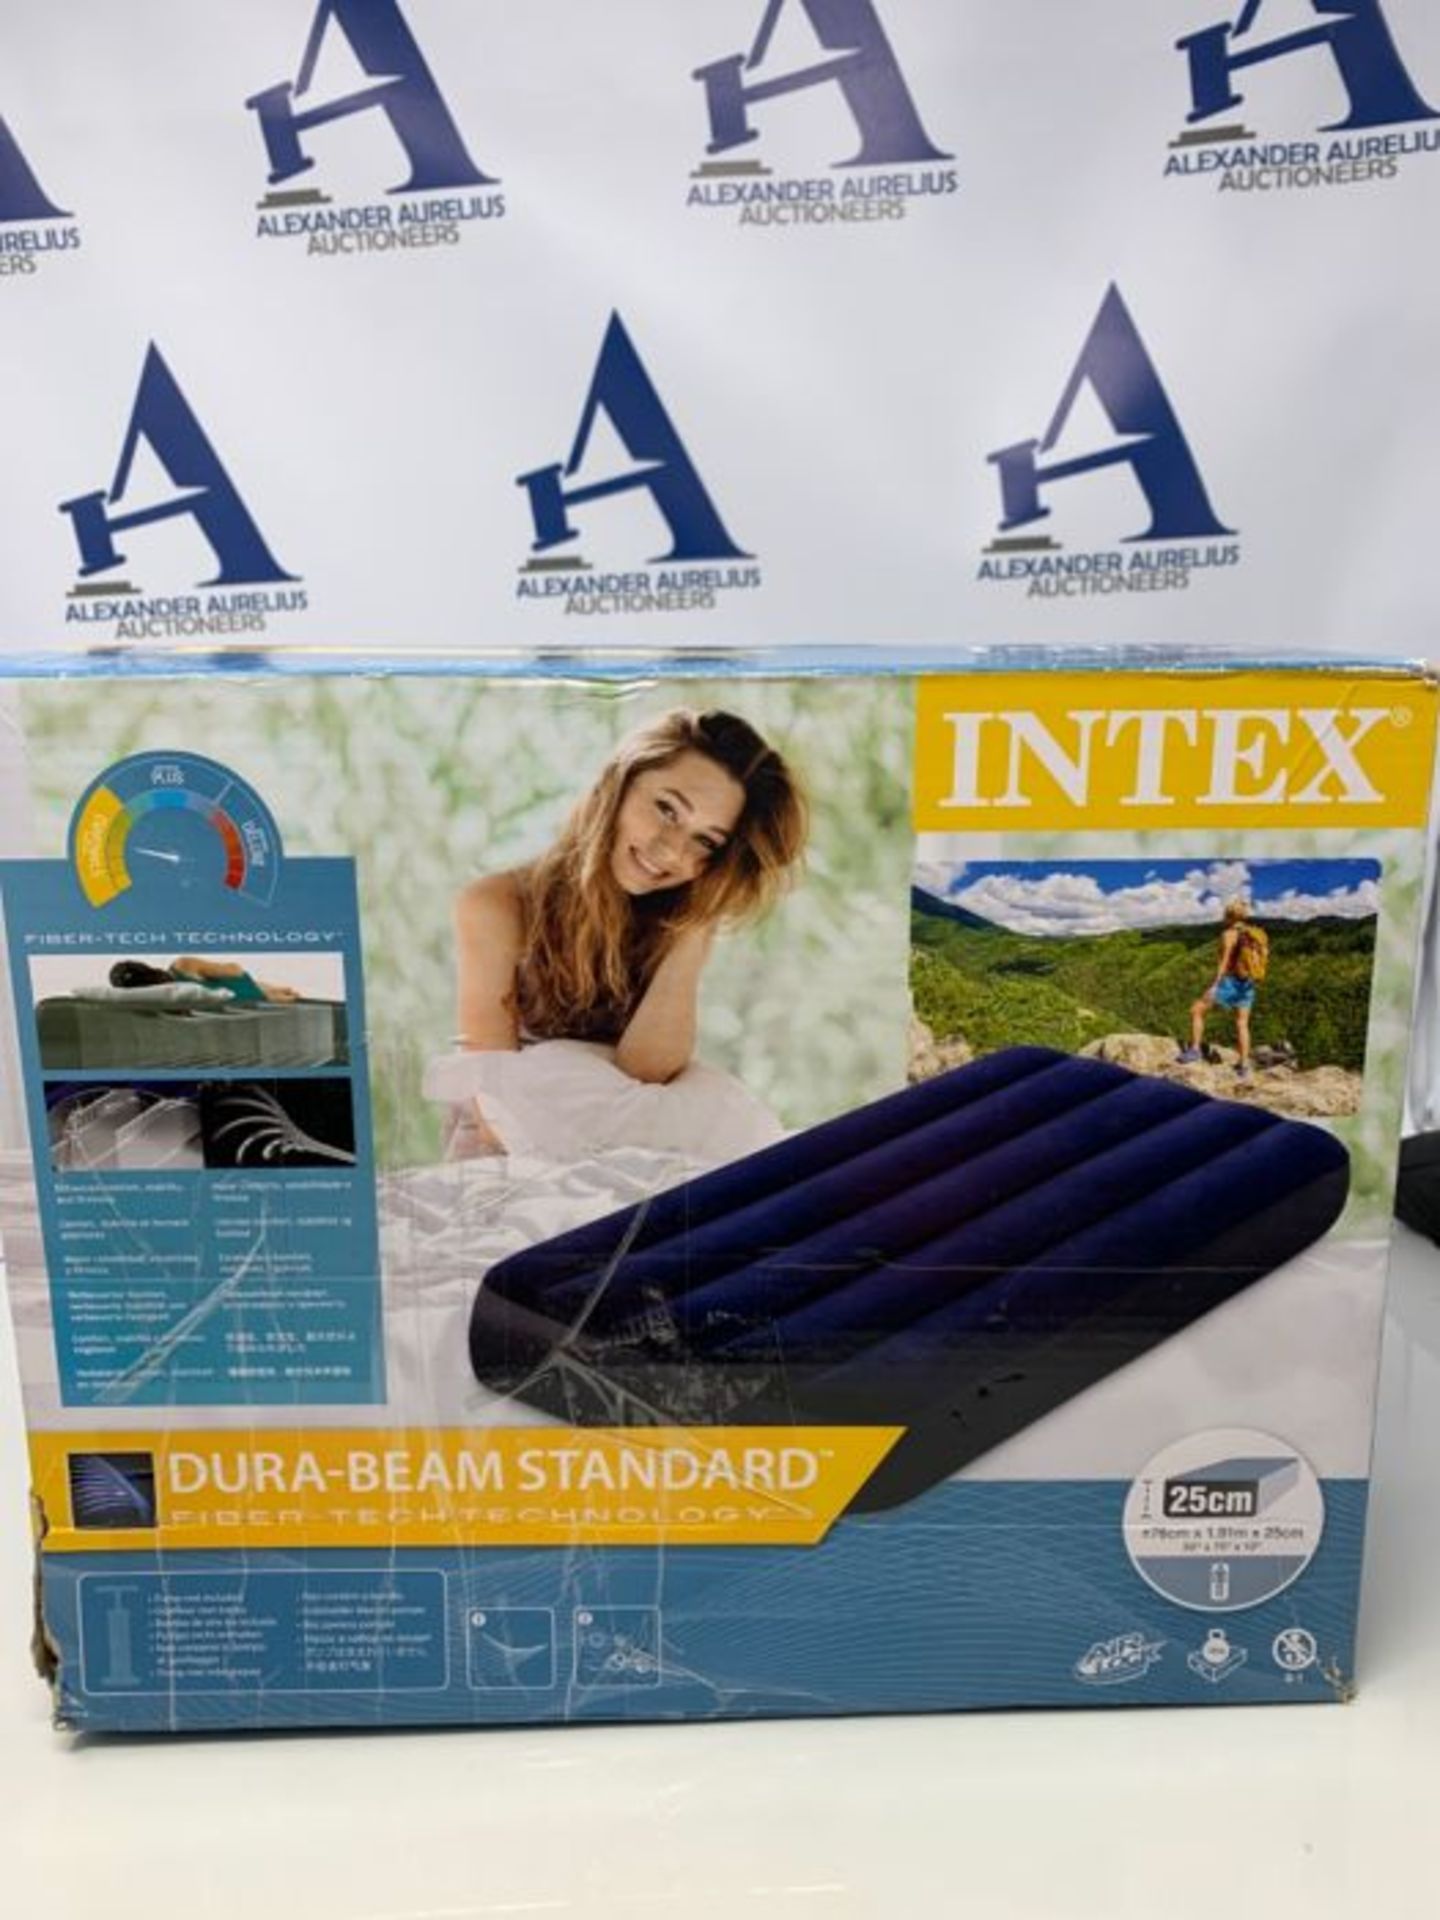 Intex Inflatable Bed, 64756, multicoloured, 76 x 191 x 25 cm - Image 2 of 3